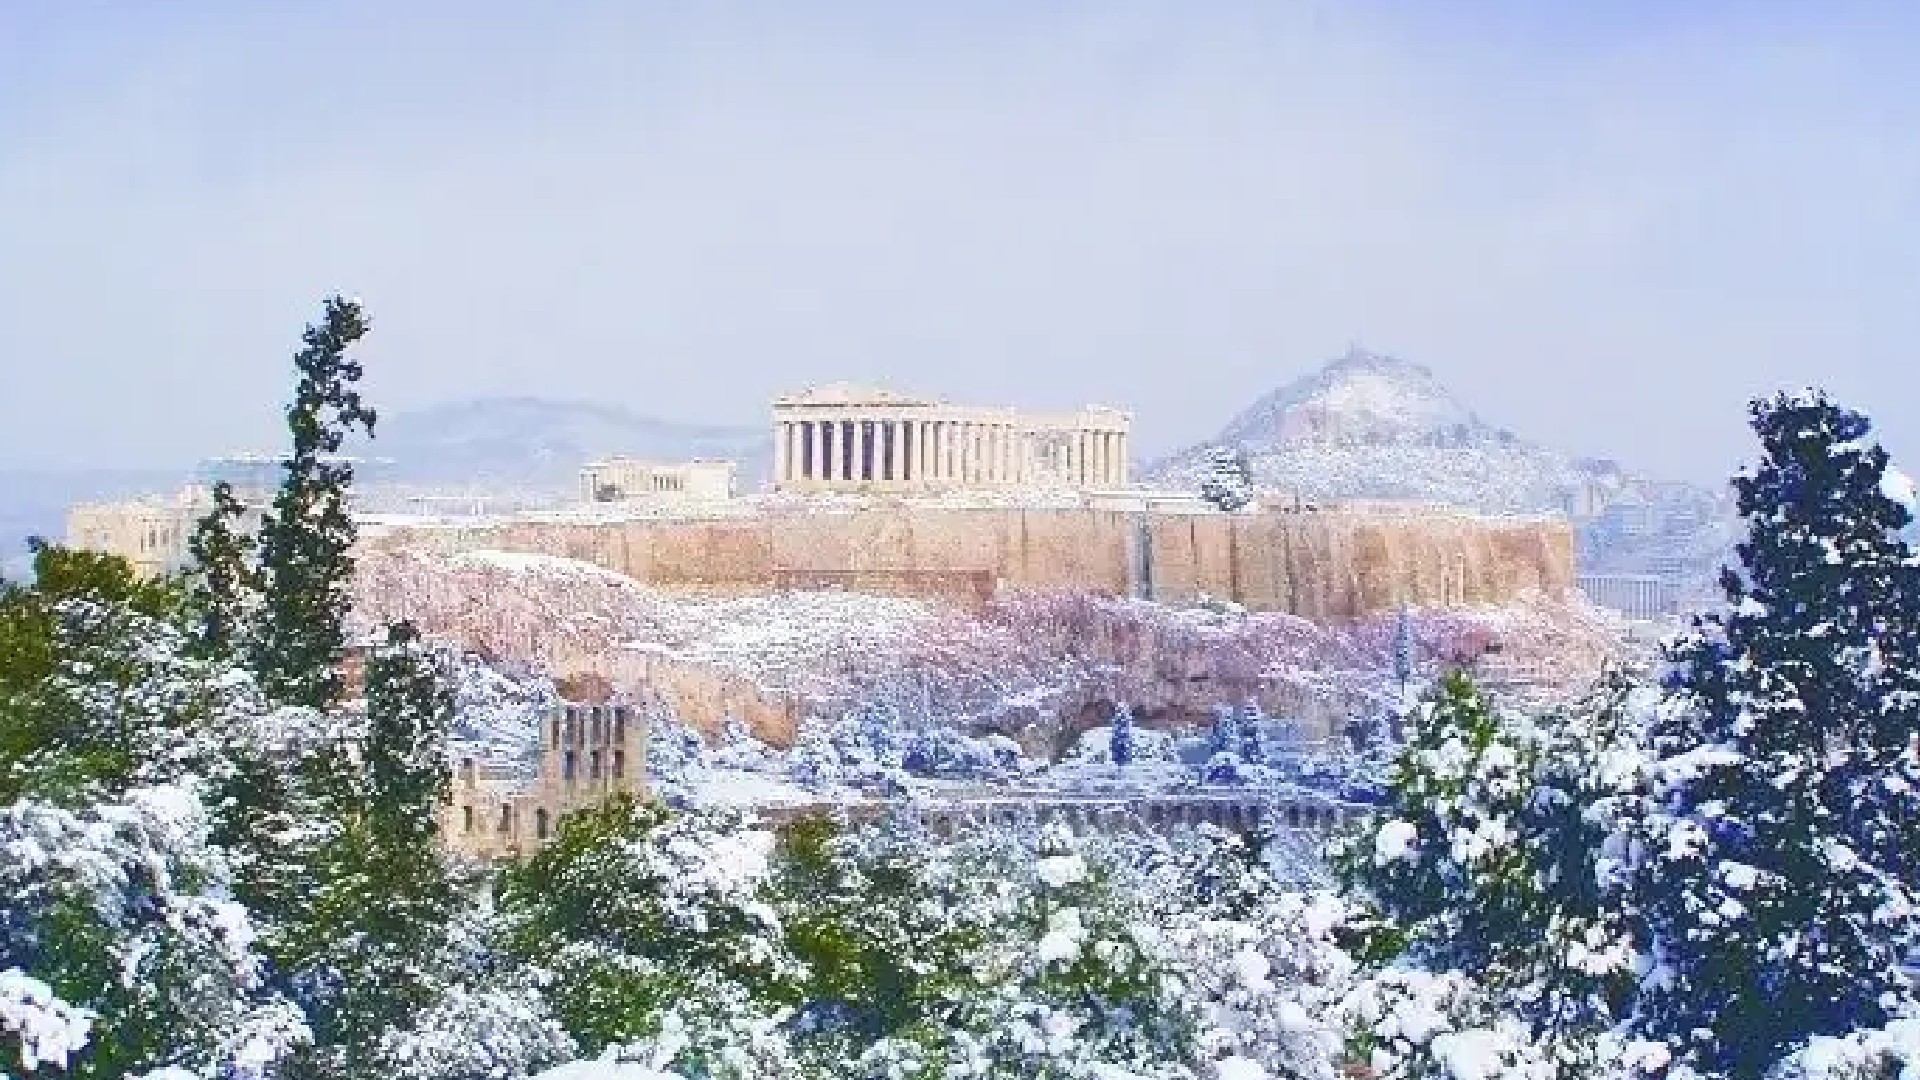 Athens In Winter Is A Great Place To Escape The Bitter Cold & Soak Some Sun In 2021